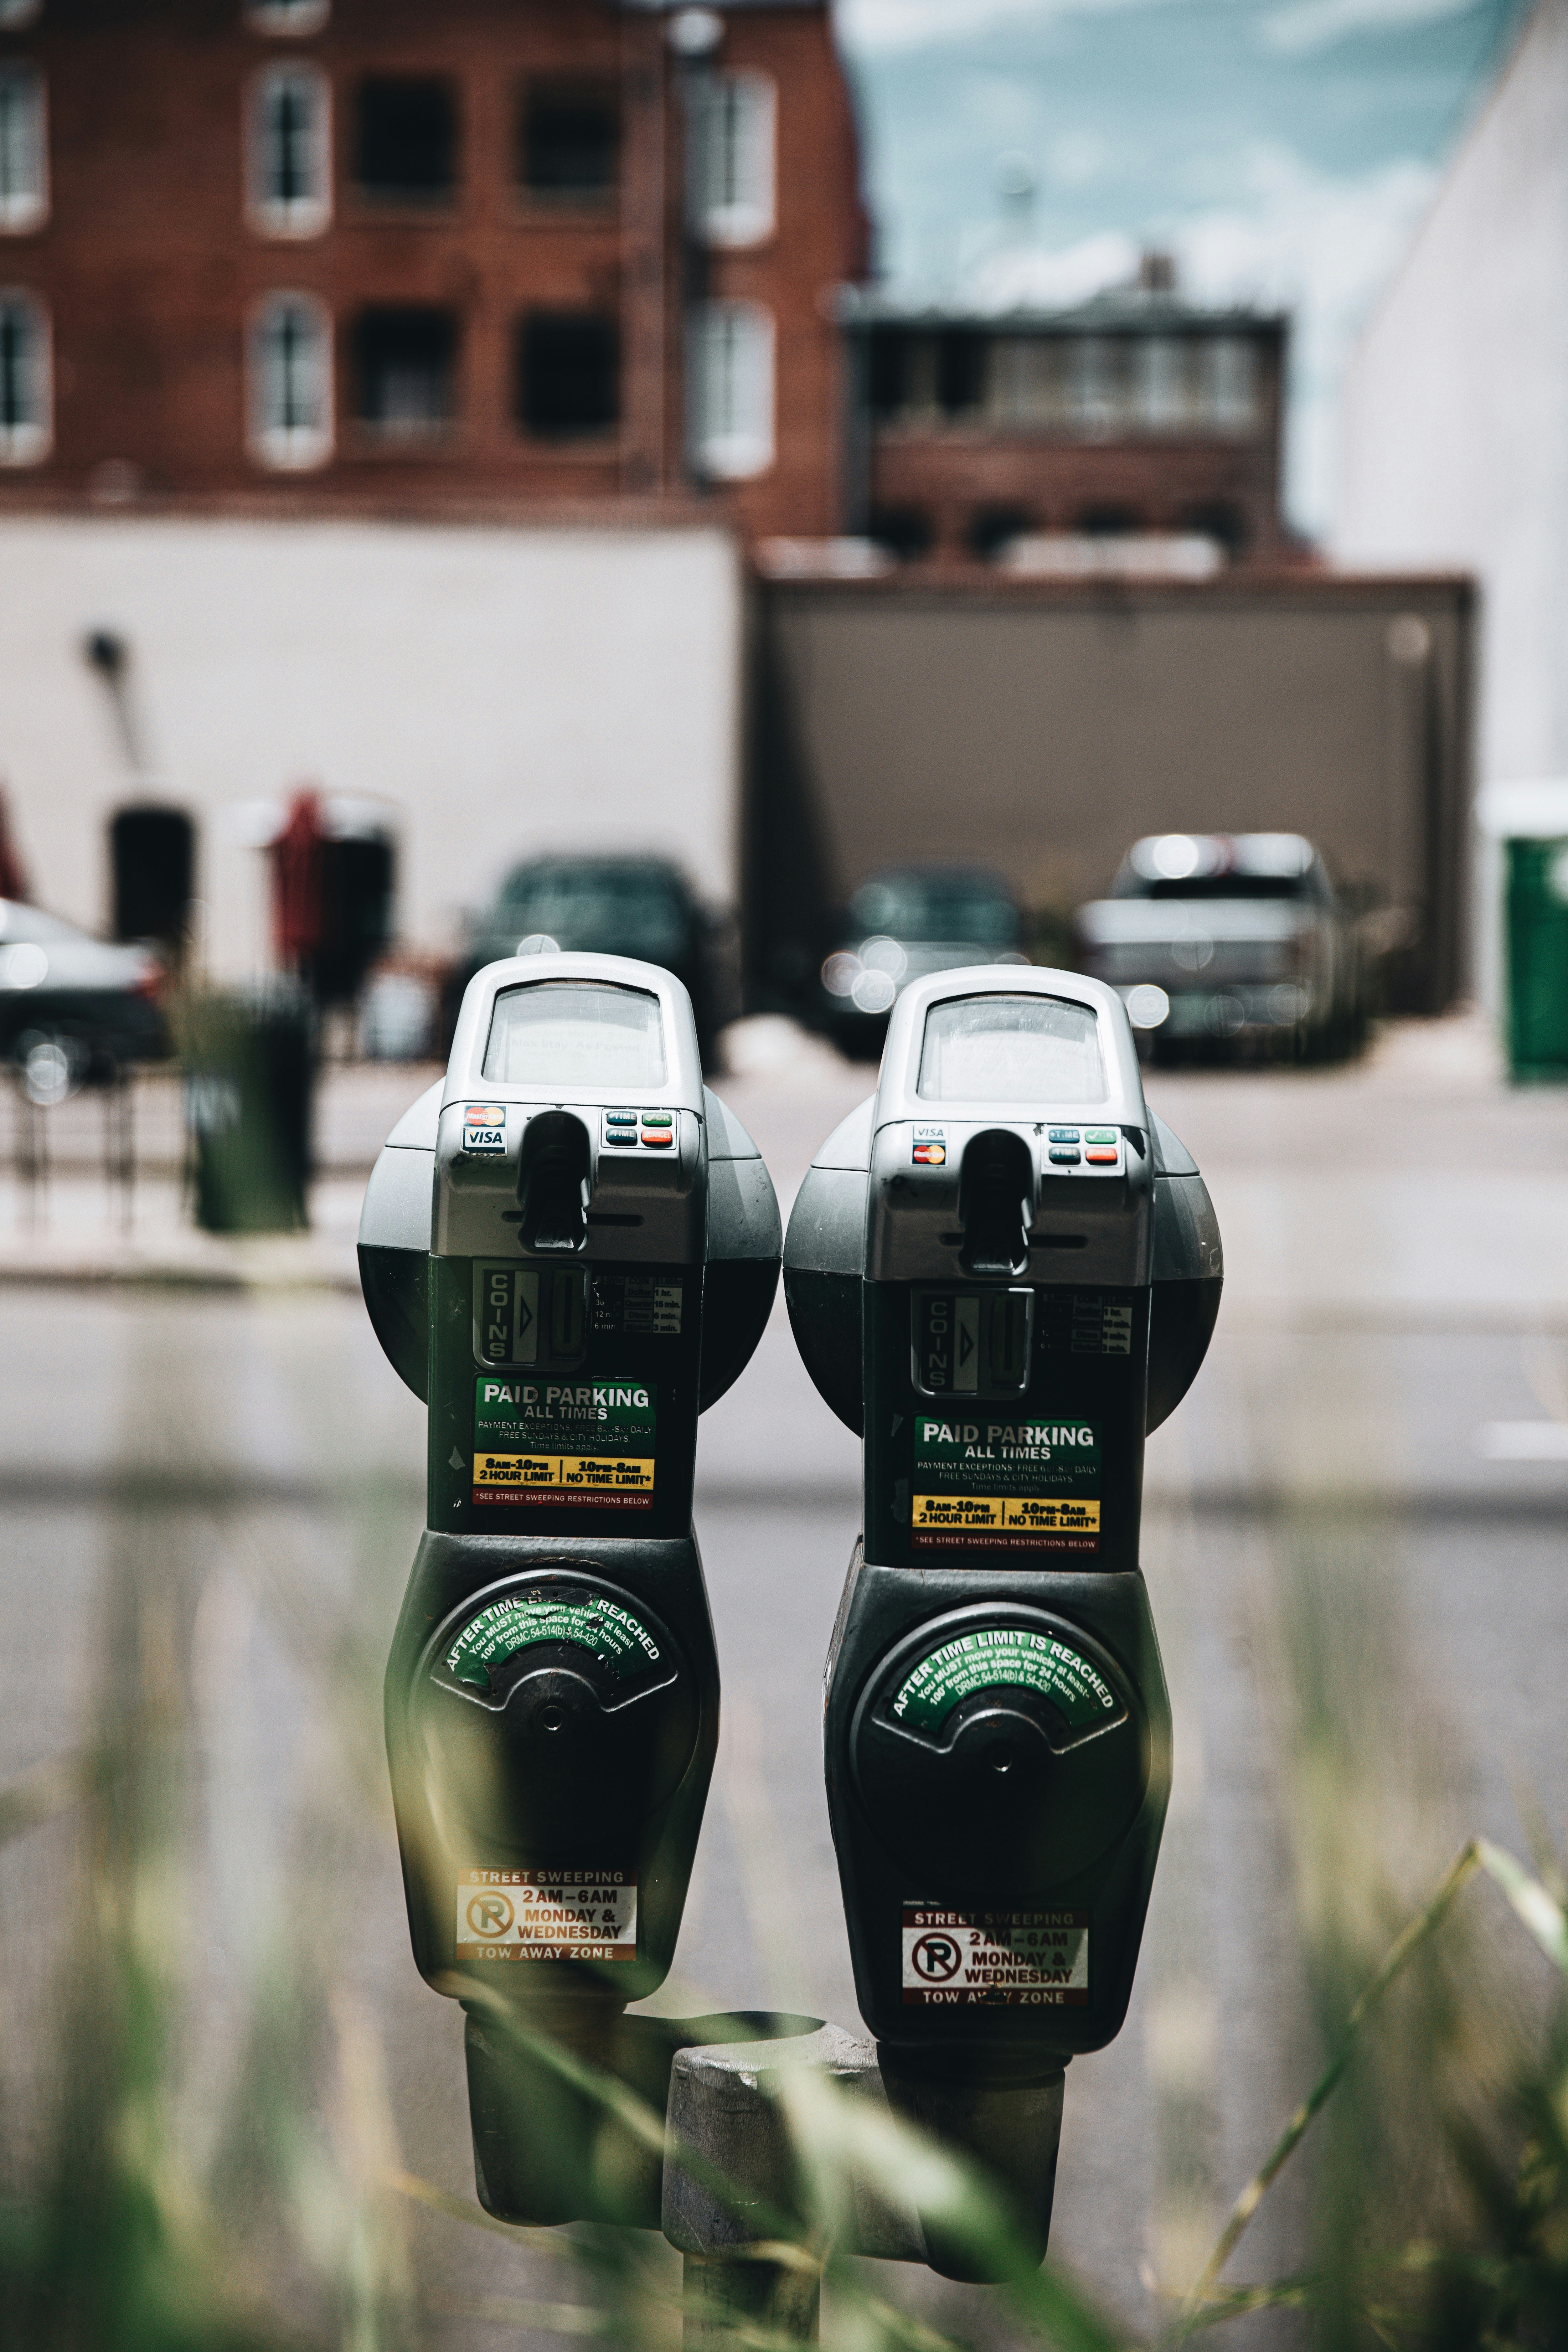 2 green and black parking meter